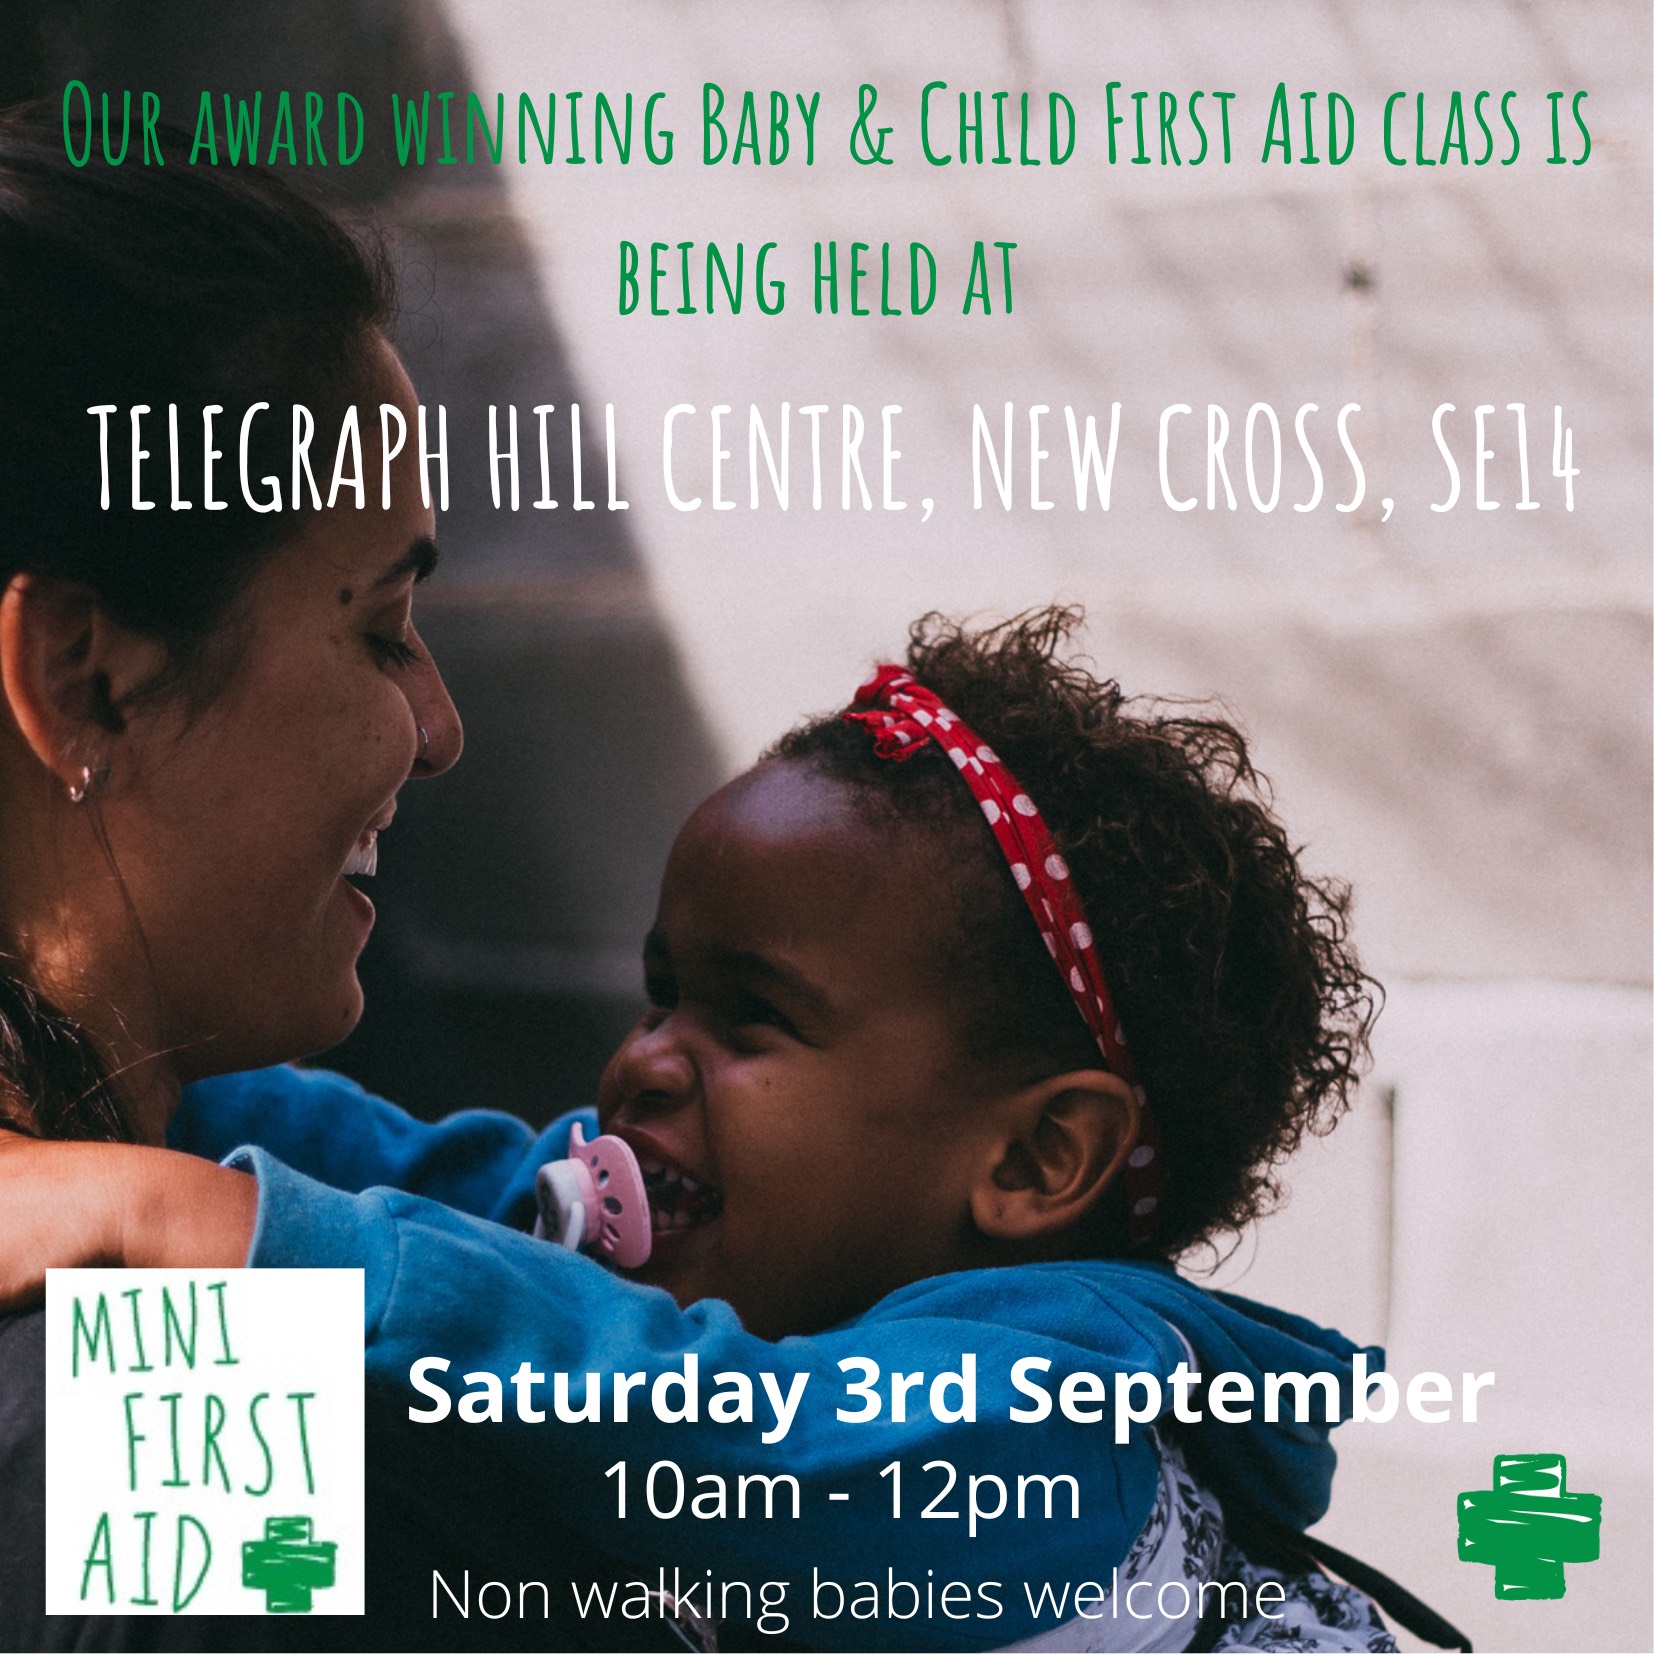 Mini First Aid South East London are visiting Telegraph Hill Centre (Saturday 3rd September)